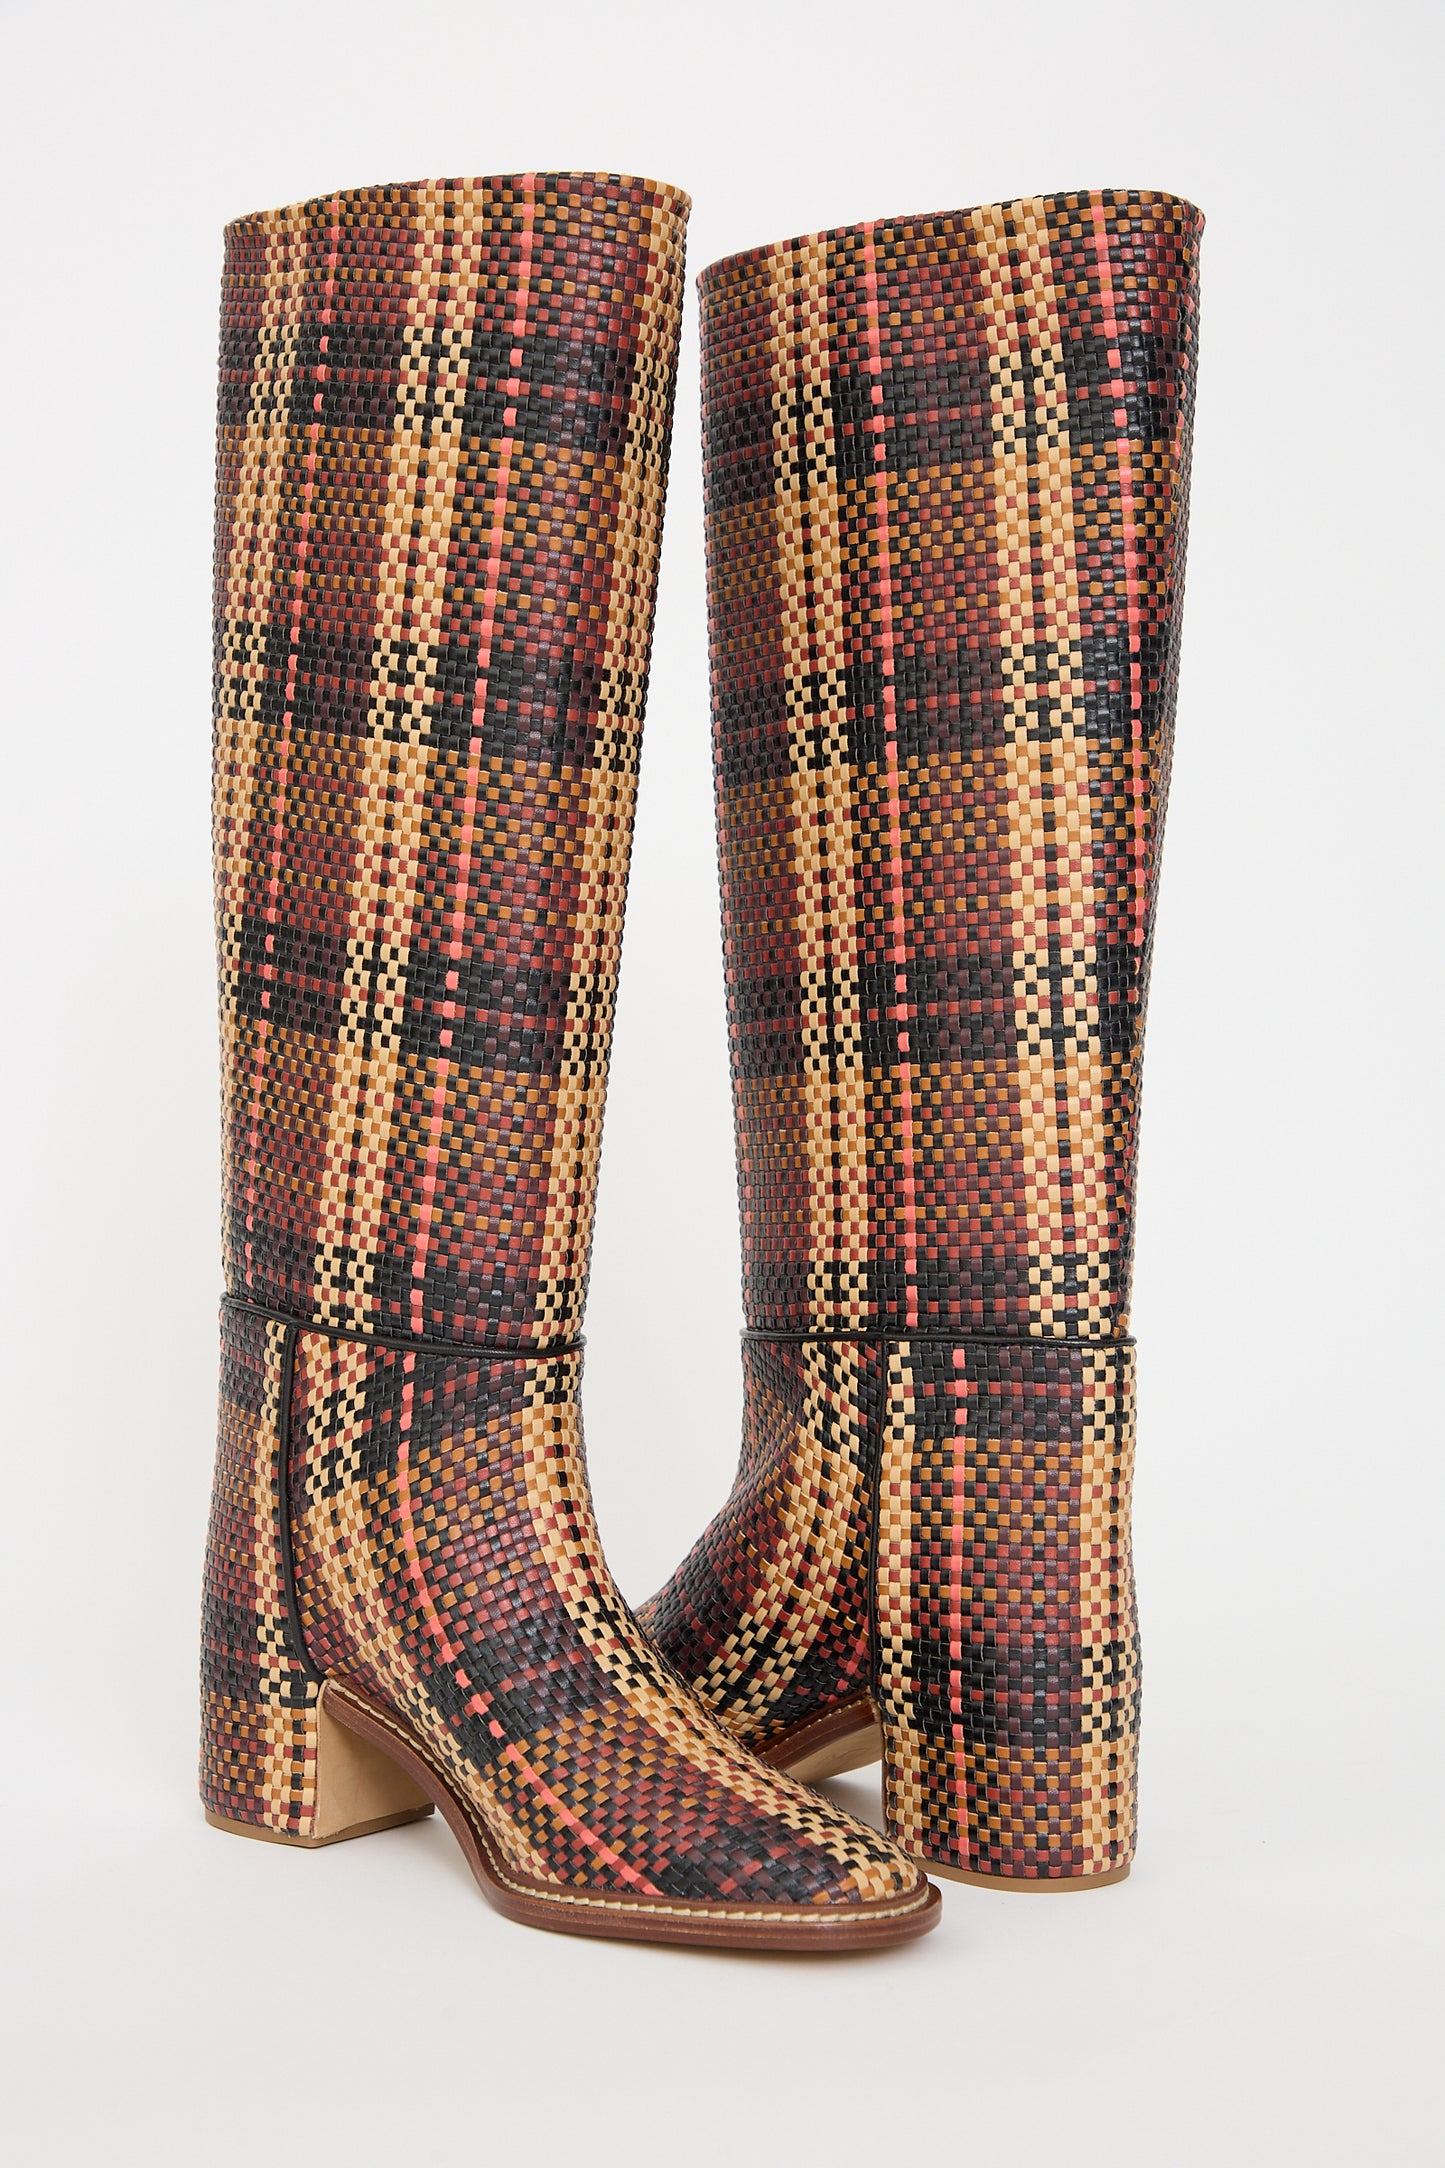 Ulla Johnson's Elena Woven Riding Boot in Brown made of vegan leather with block heels against a white background.